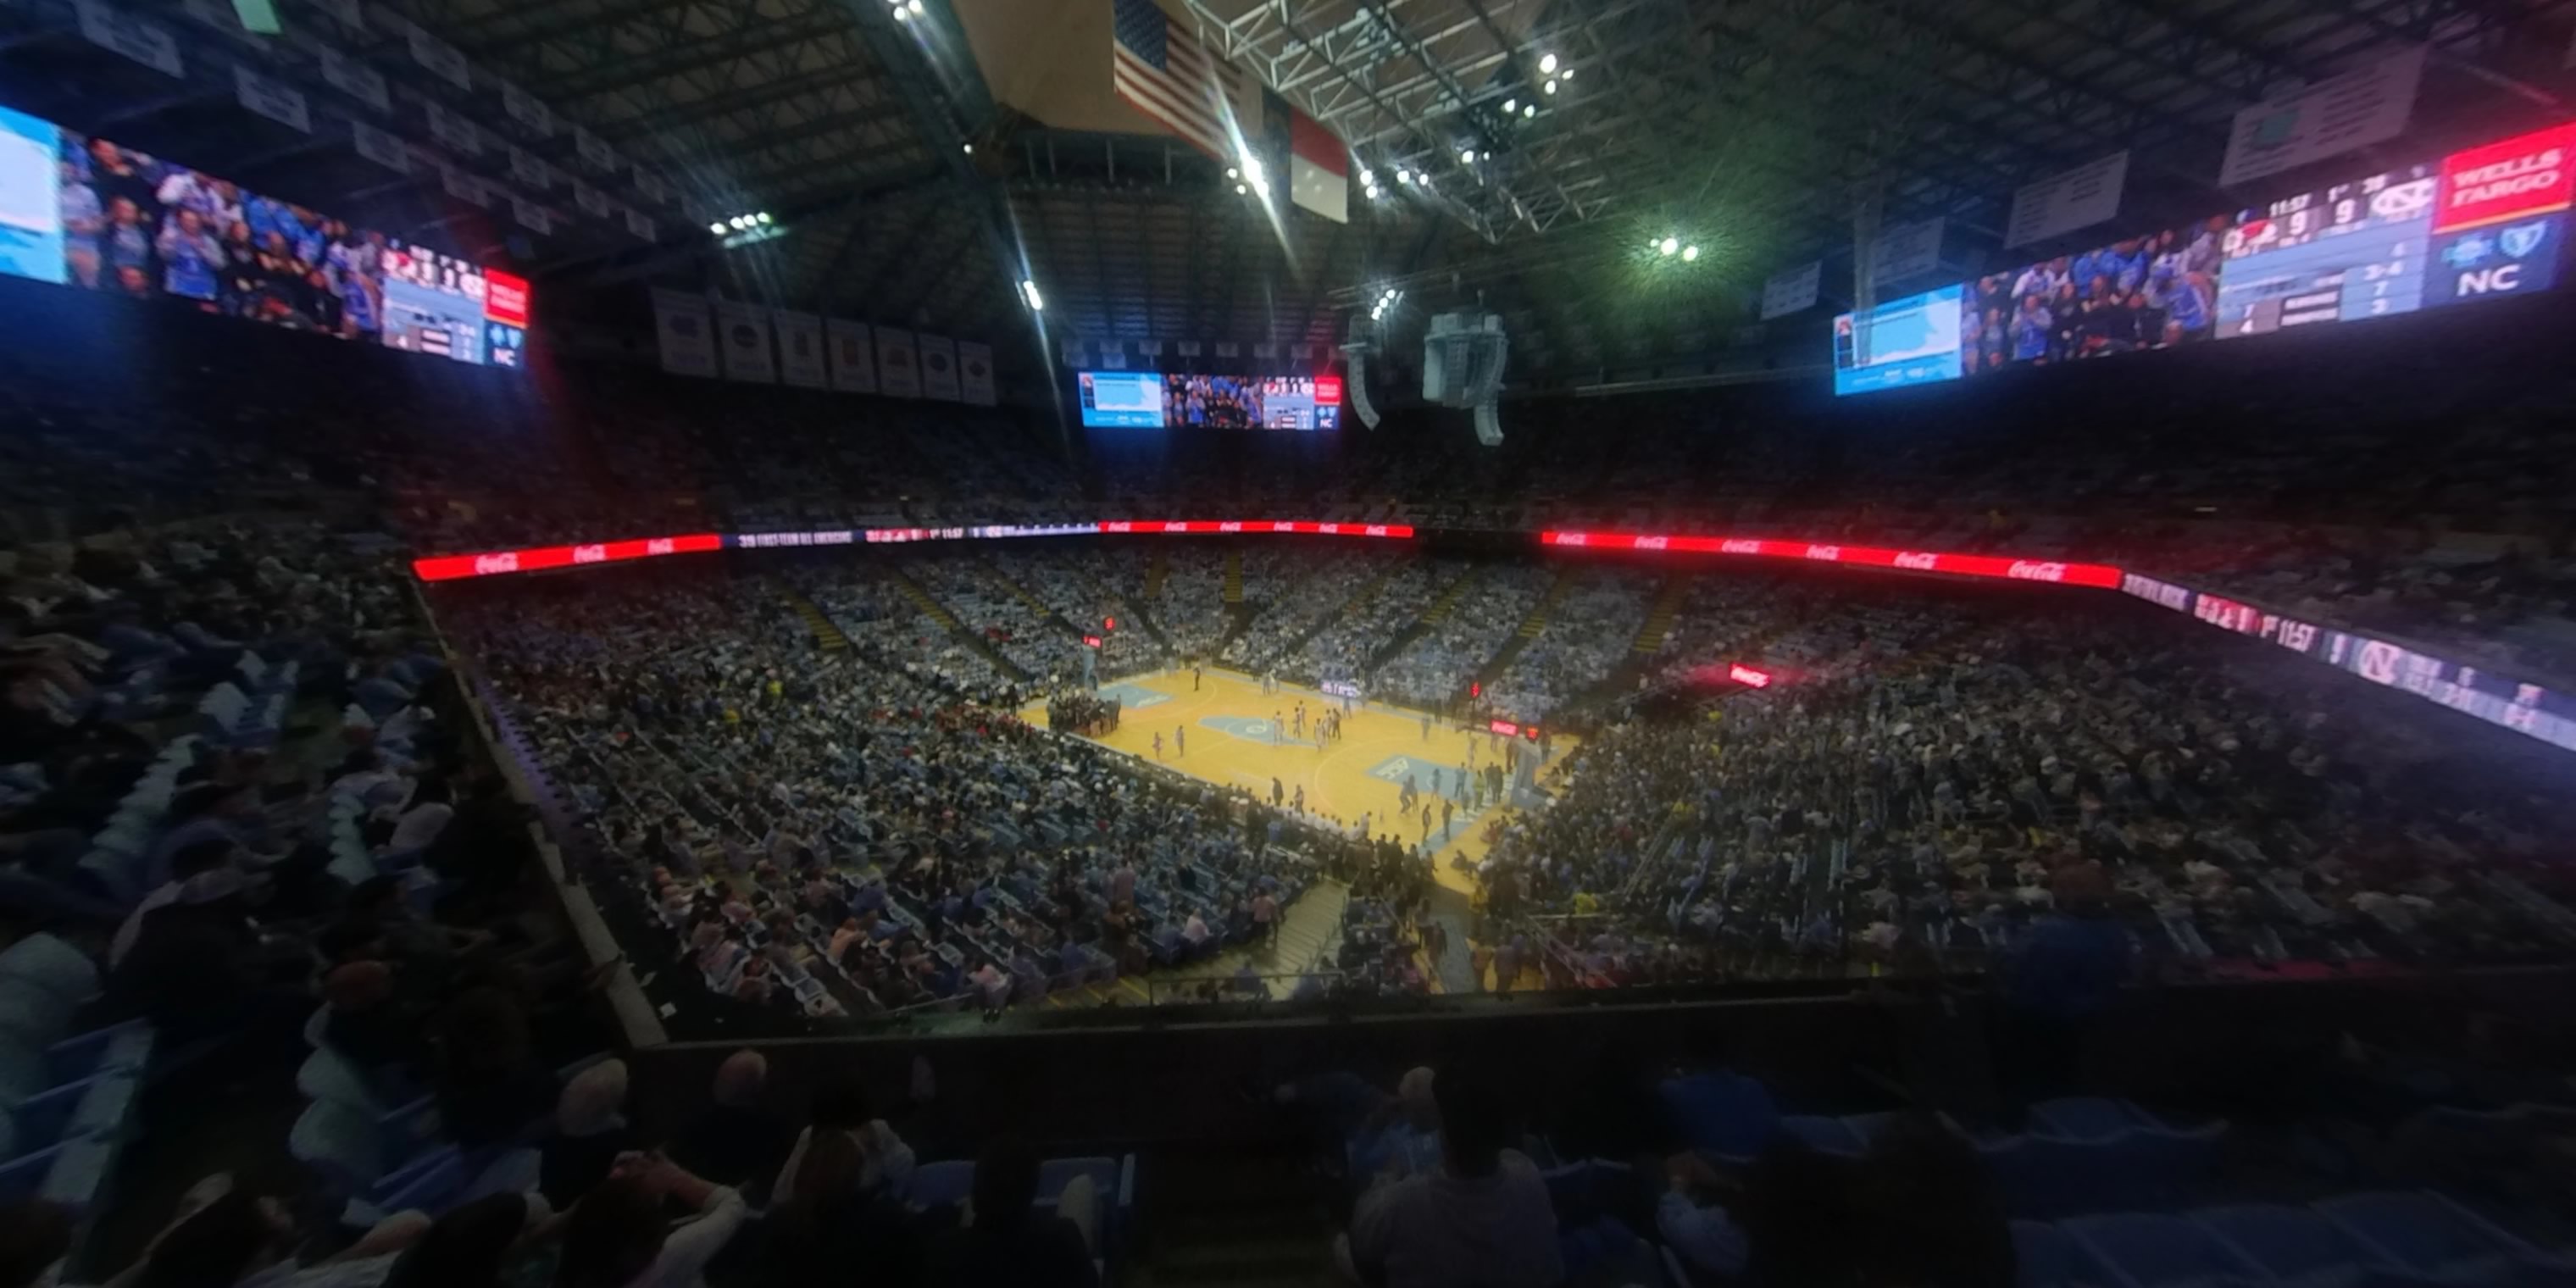 section 211a panoramic seat view  - dean smith center